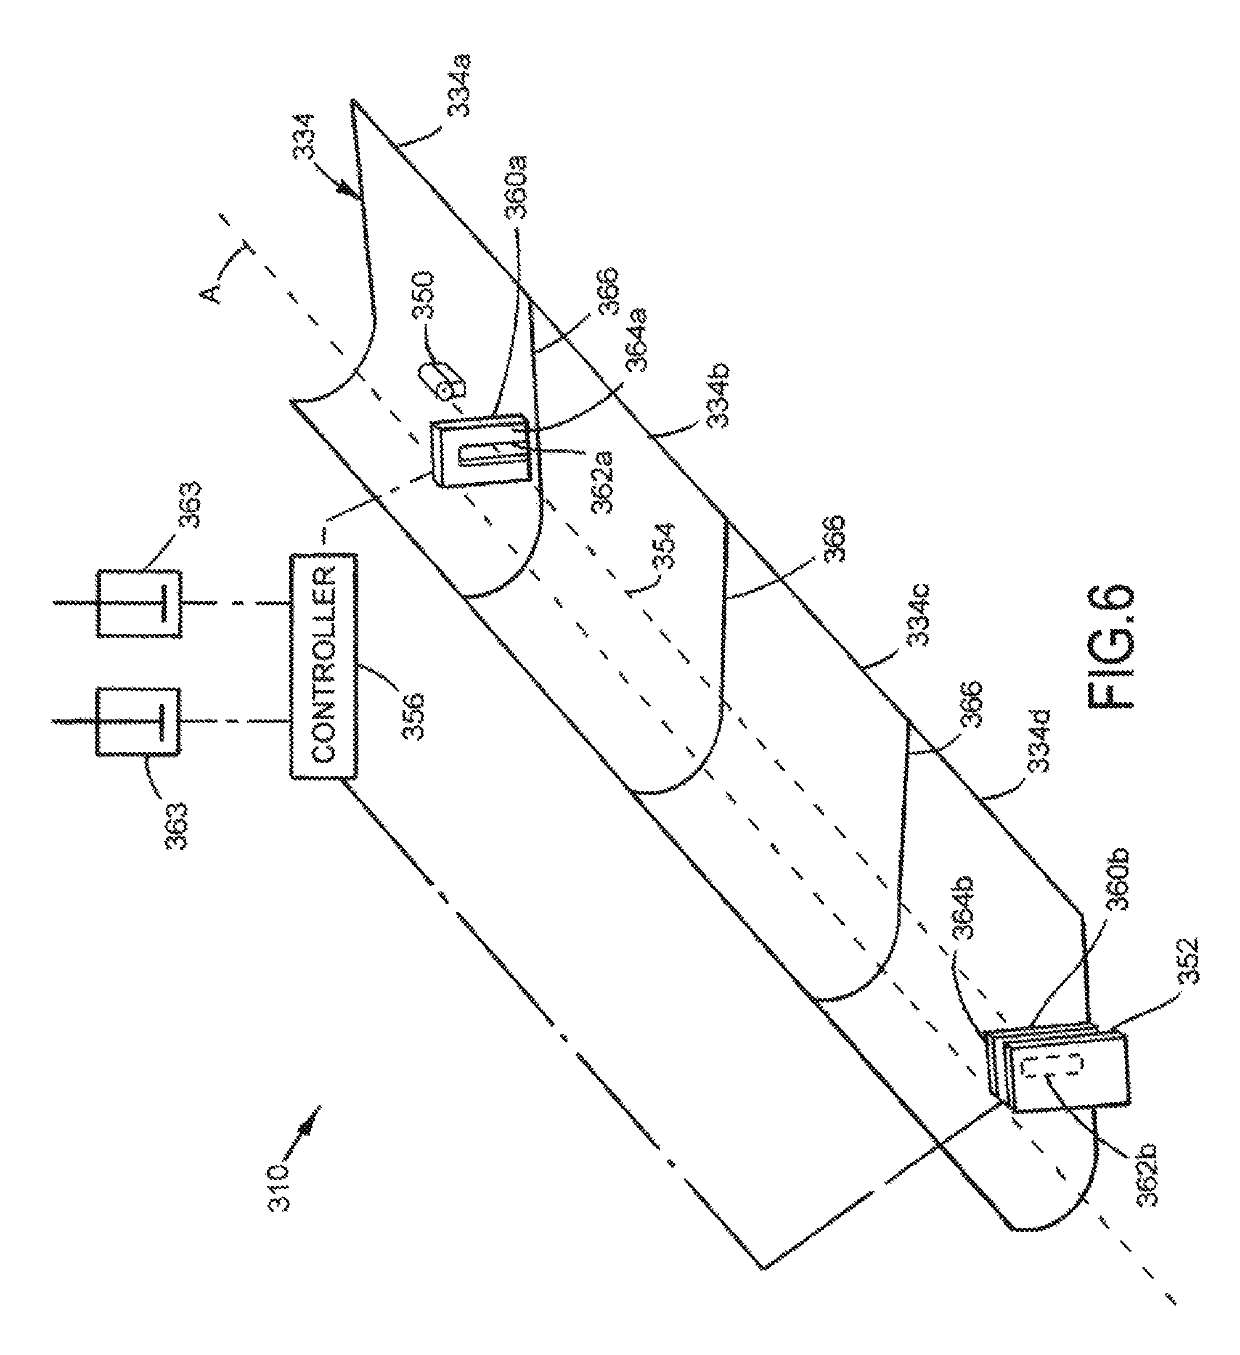 Light beam header height control system for an agricultural harvester